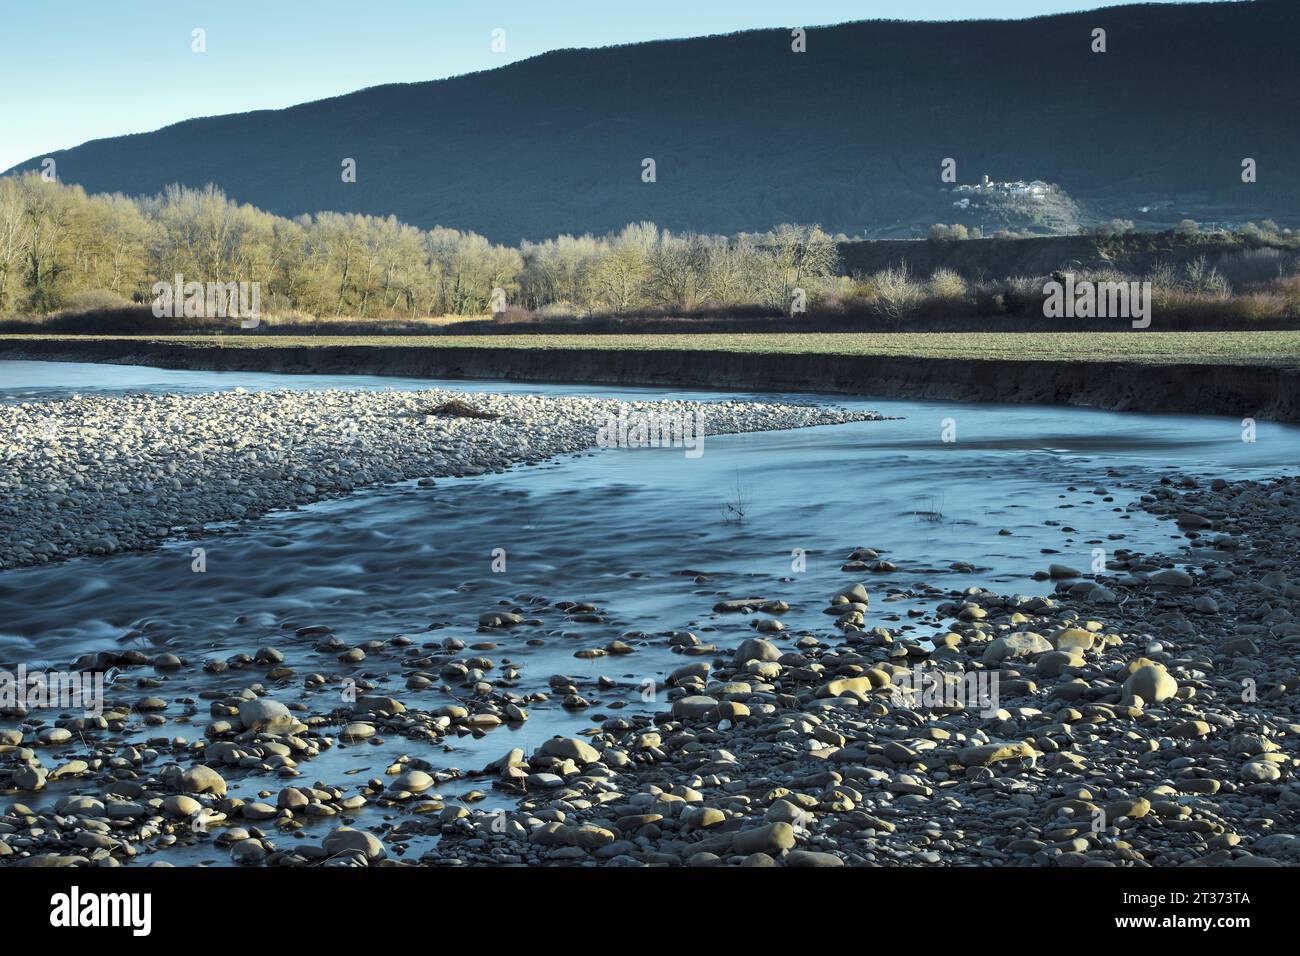 River bank with boulders. Stock Photo